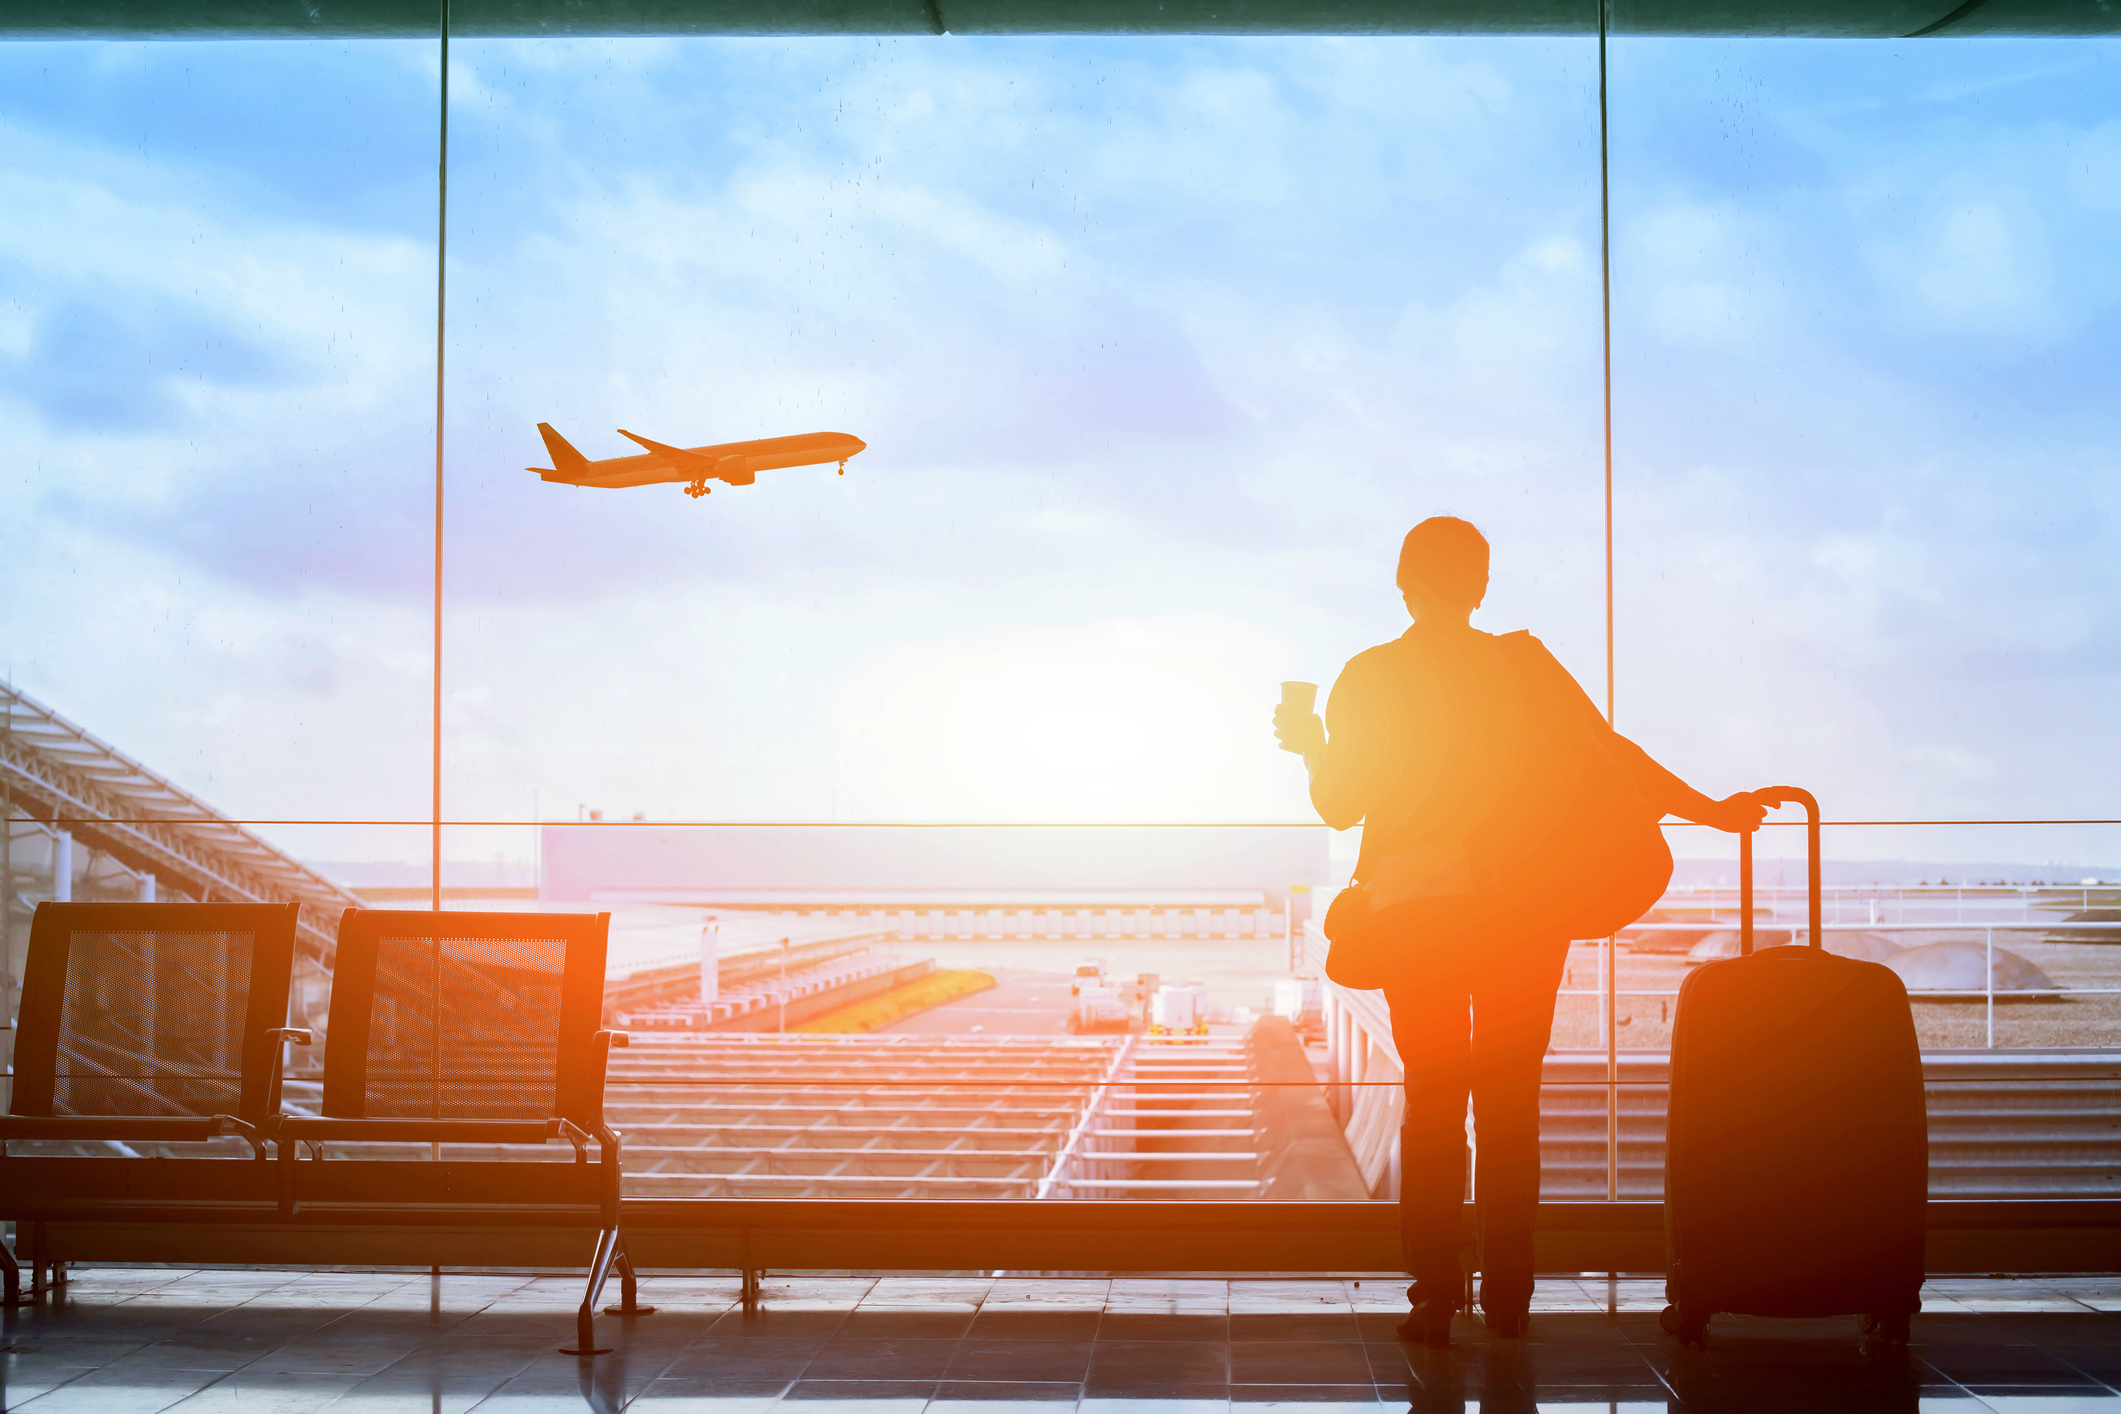 Understand google flights and how to respond - brightedge